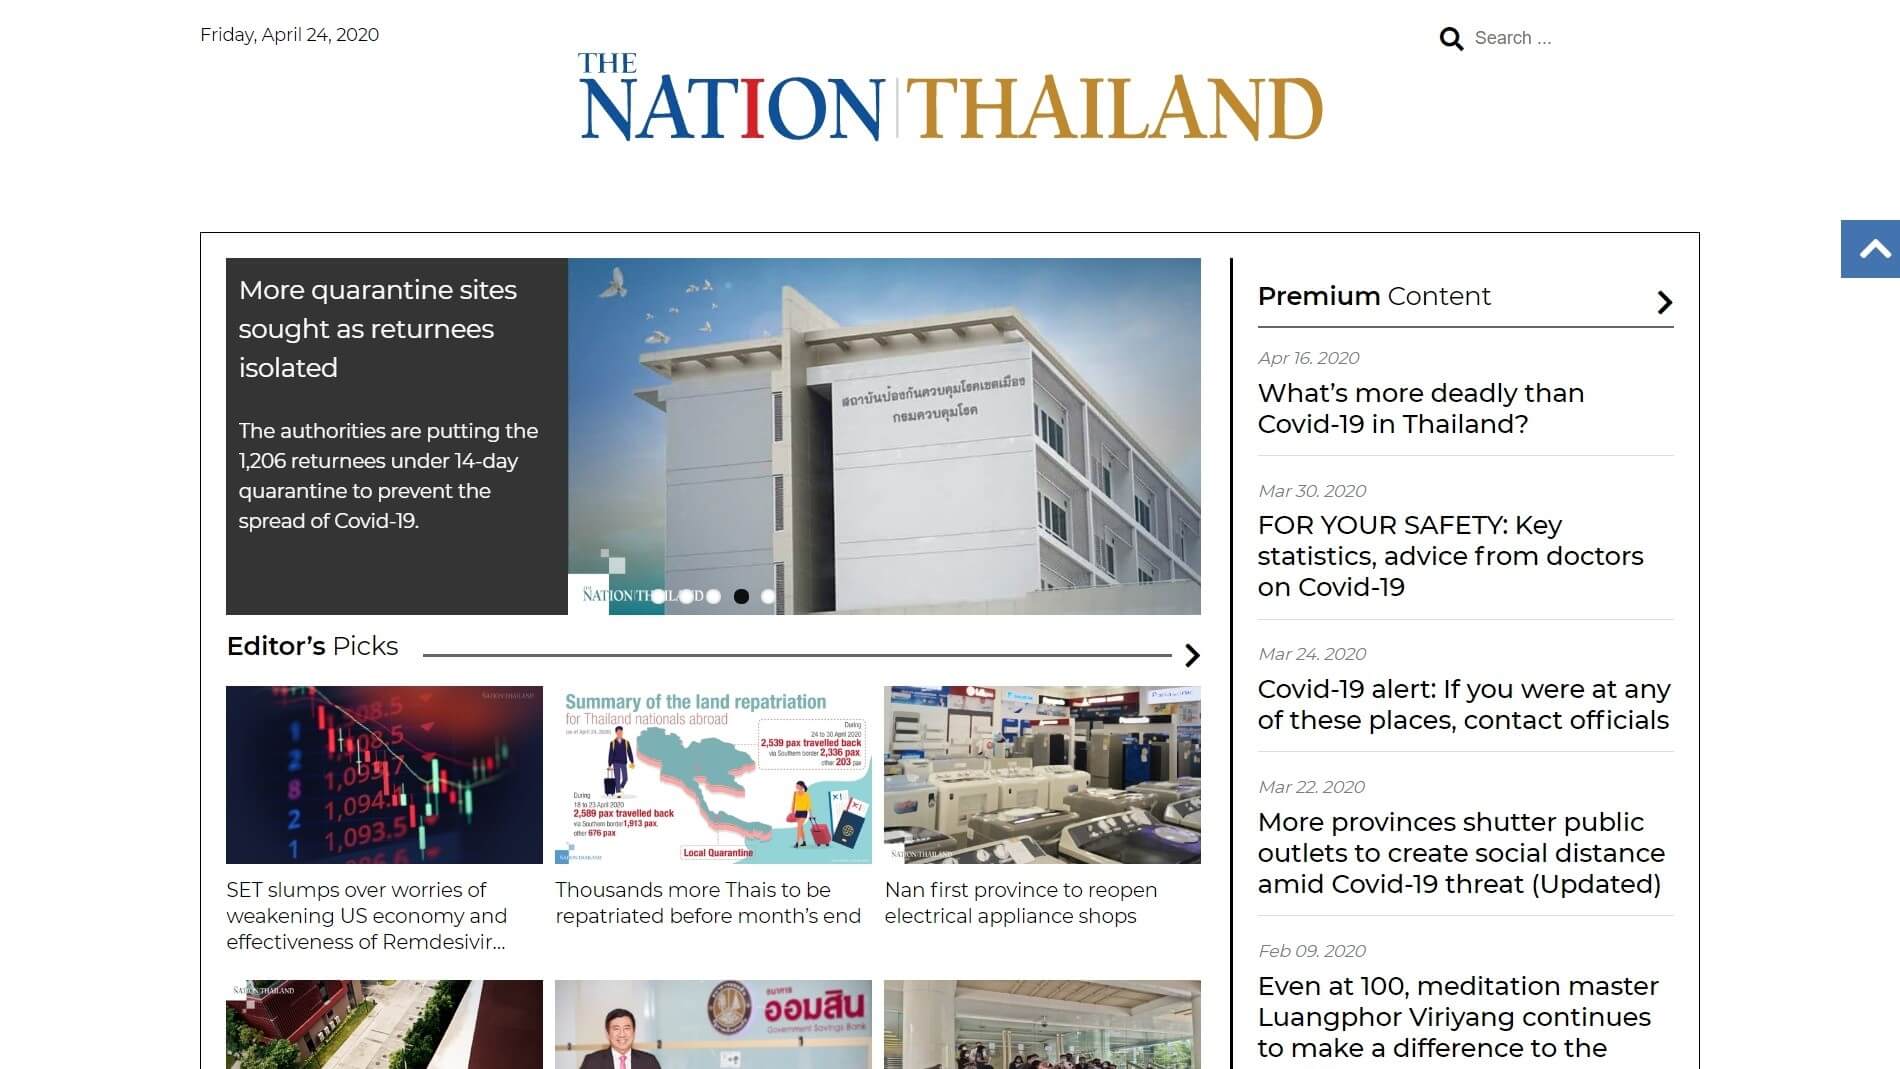 thailand newspapers 17 The Nation Thailand website